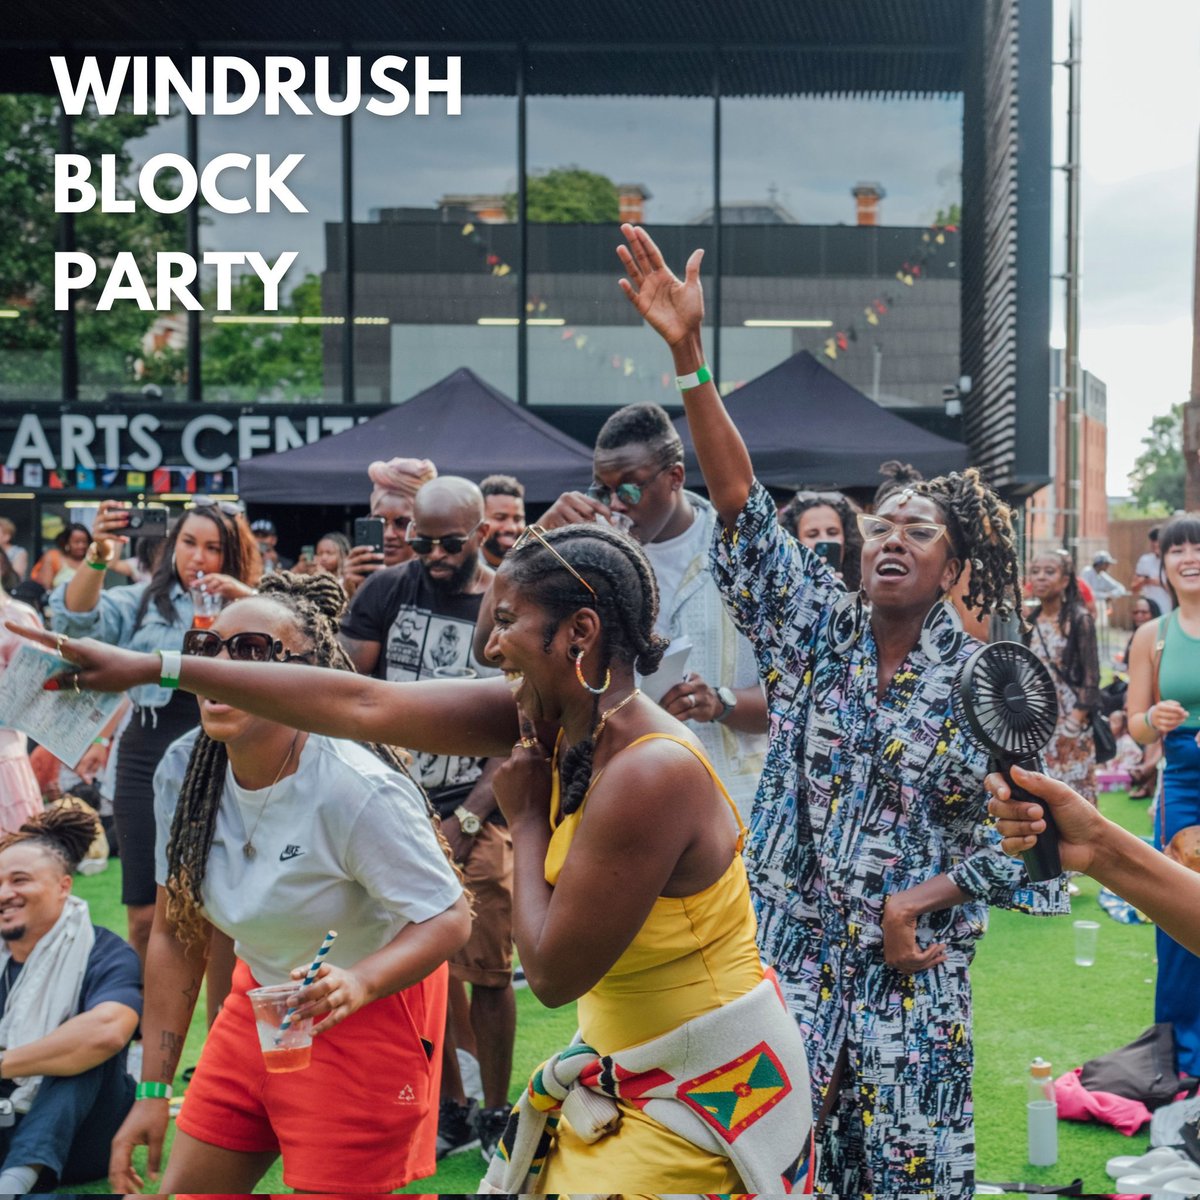 Our family friendly Windrush Block Party is back on Saturday 22nd June! Packed with live-music from local performers & DJ’s, spoken word, a family party, arts and crafts, pop up stalls, workshops, & delicious local Caribbean and African food. Book here! bit.ly/44ynP82